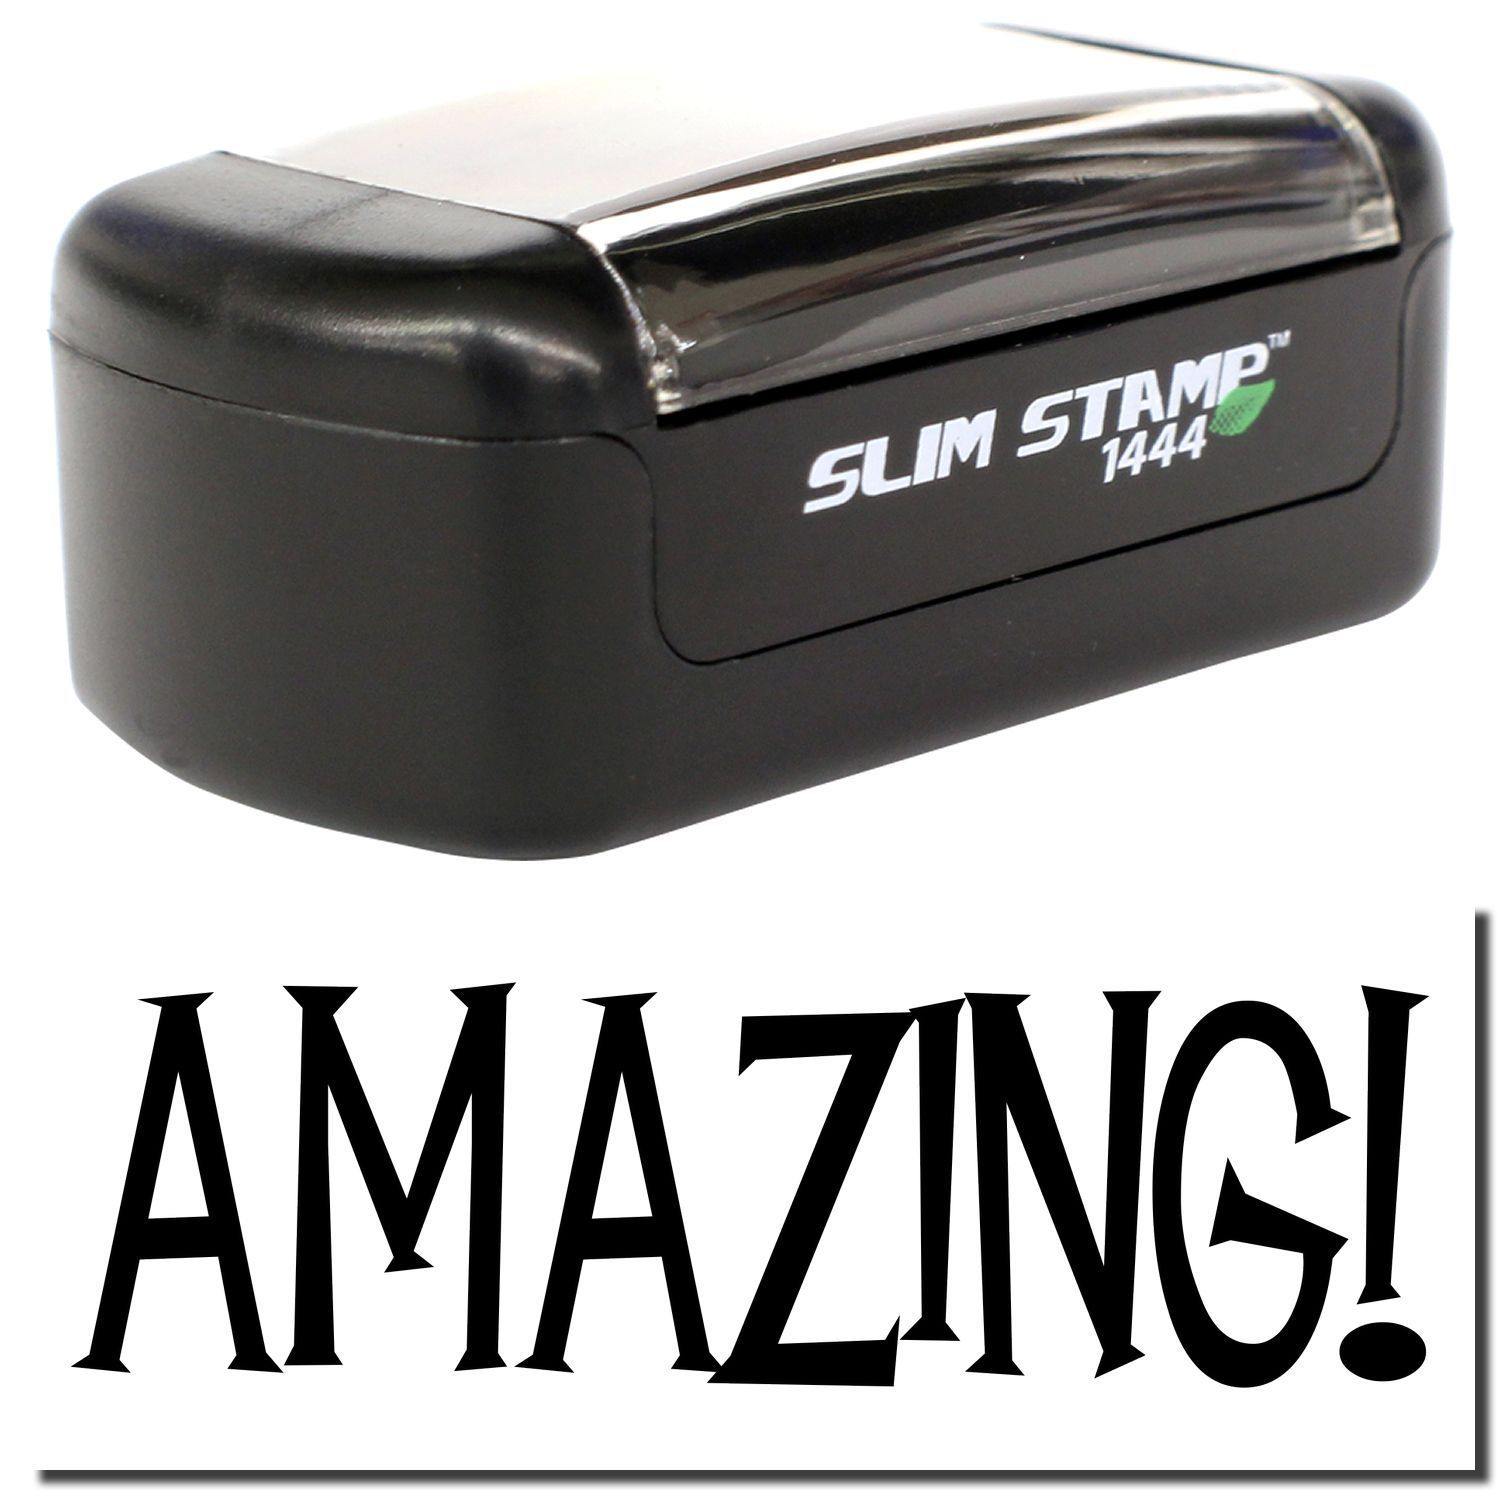 A stock office pre-inked stamp with a stamped image showing how the text "AMAZING!" is displayed after stamping.